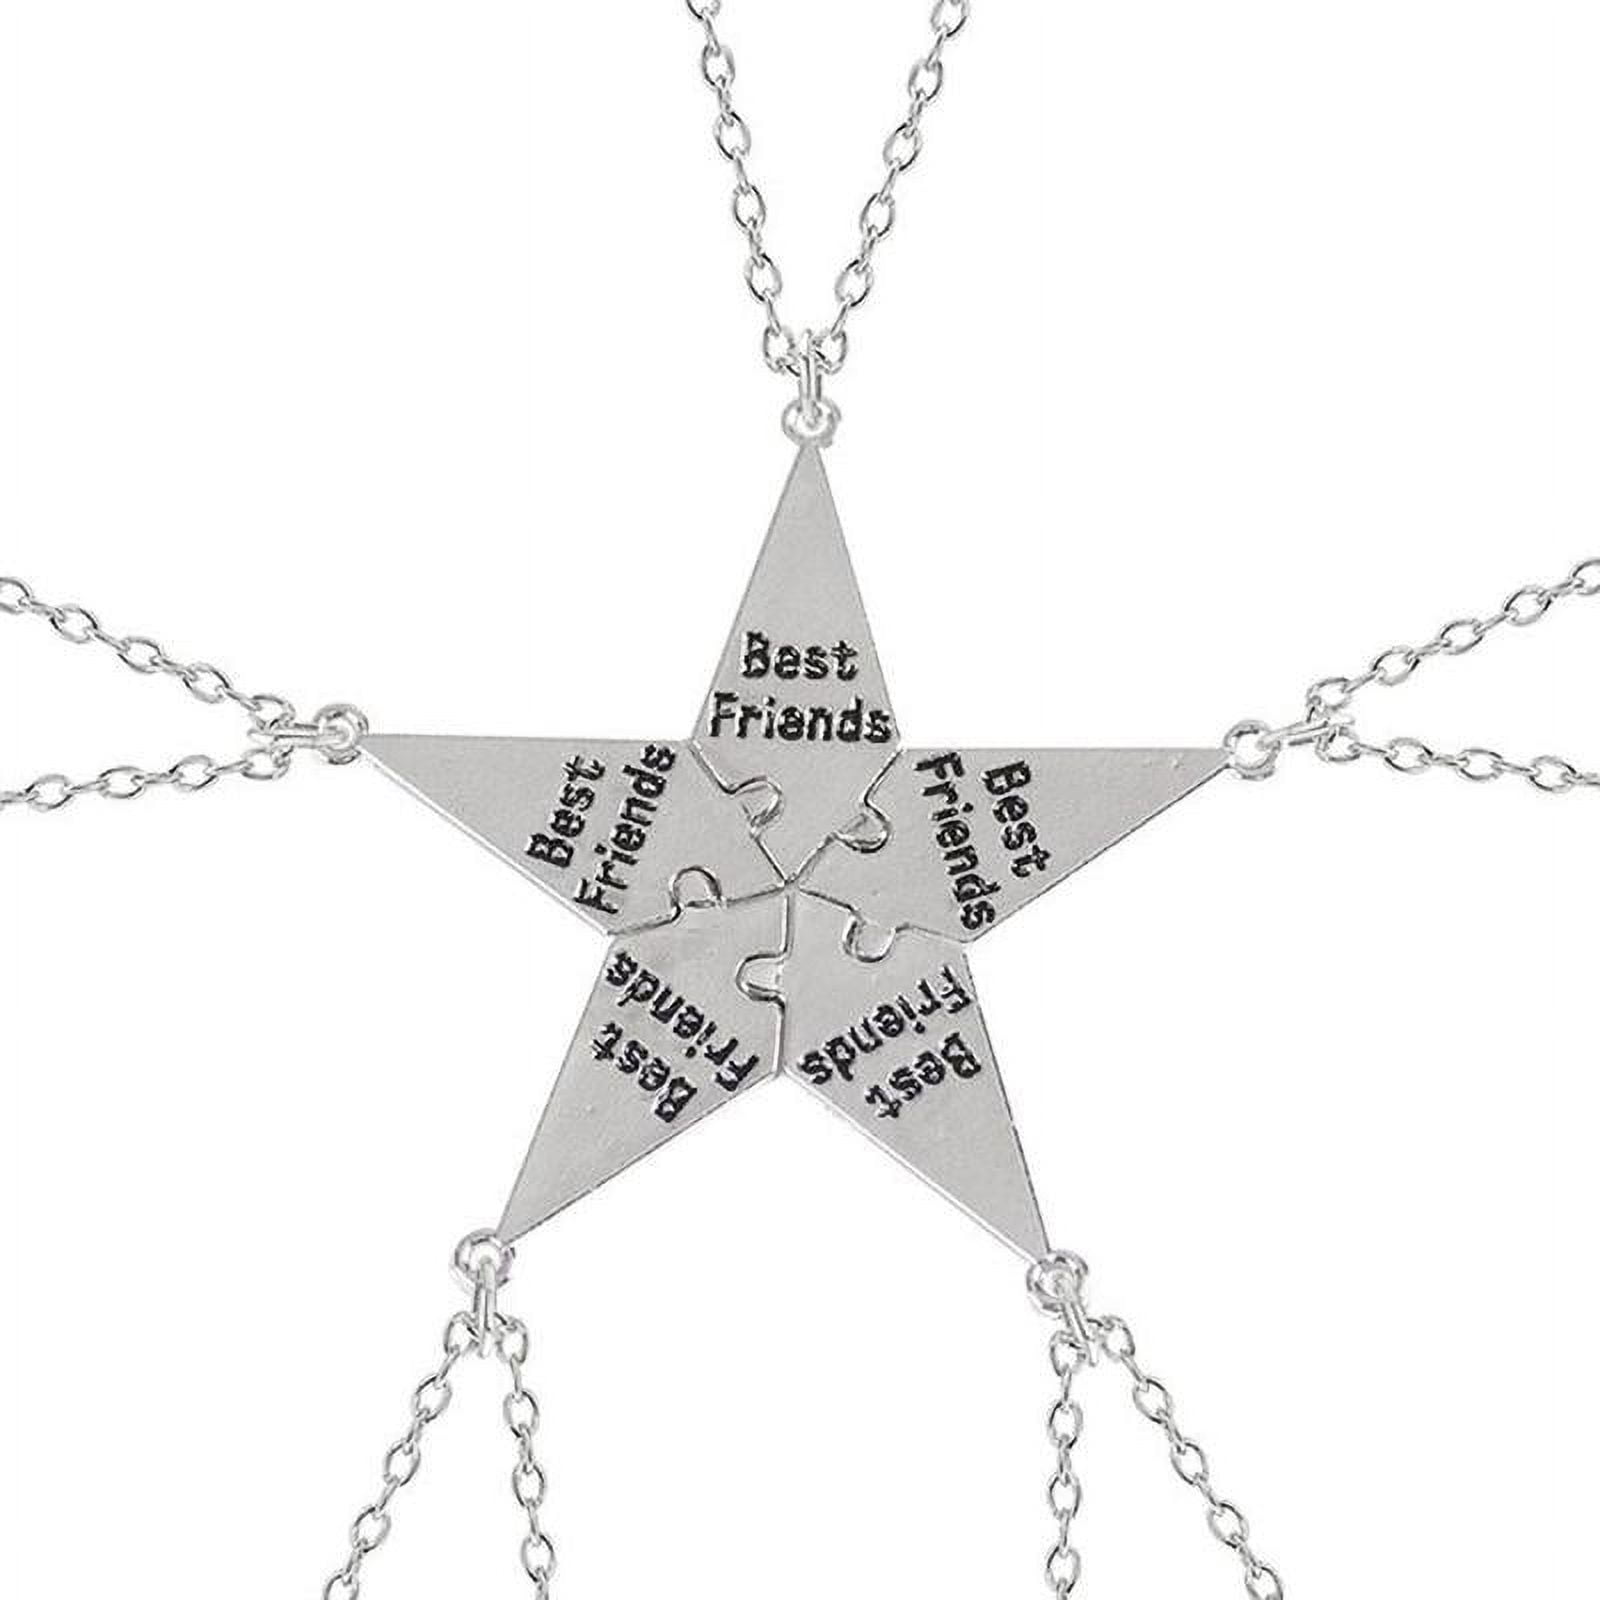 5 piece Set Of Men And Women Stitching Choker Best Friend Alloy Pendant Letter Necklace Bff Friendship Between Five People 7025c8ef 20df 4520 967e 8a3fe946a68b.26c211c81a192b415c8506f8bc594244